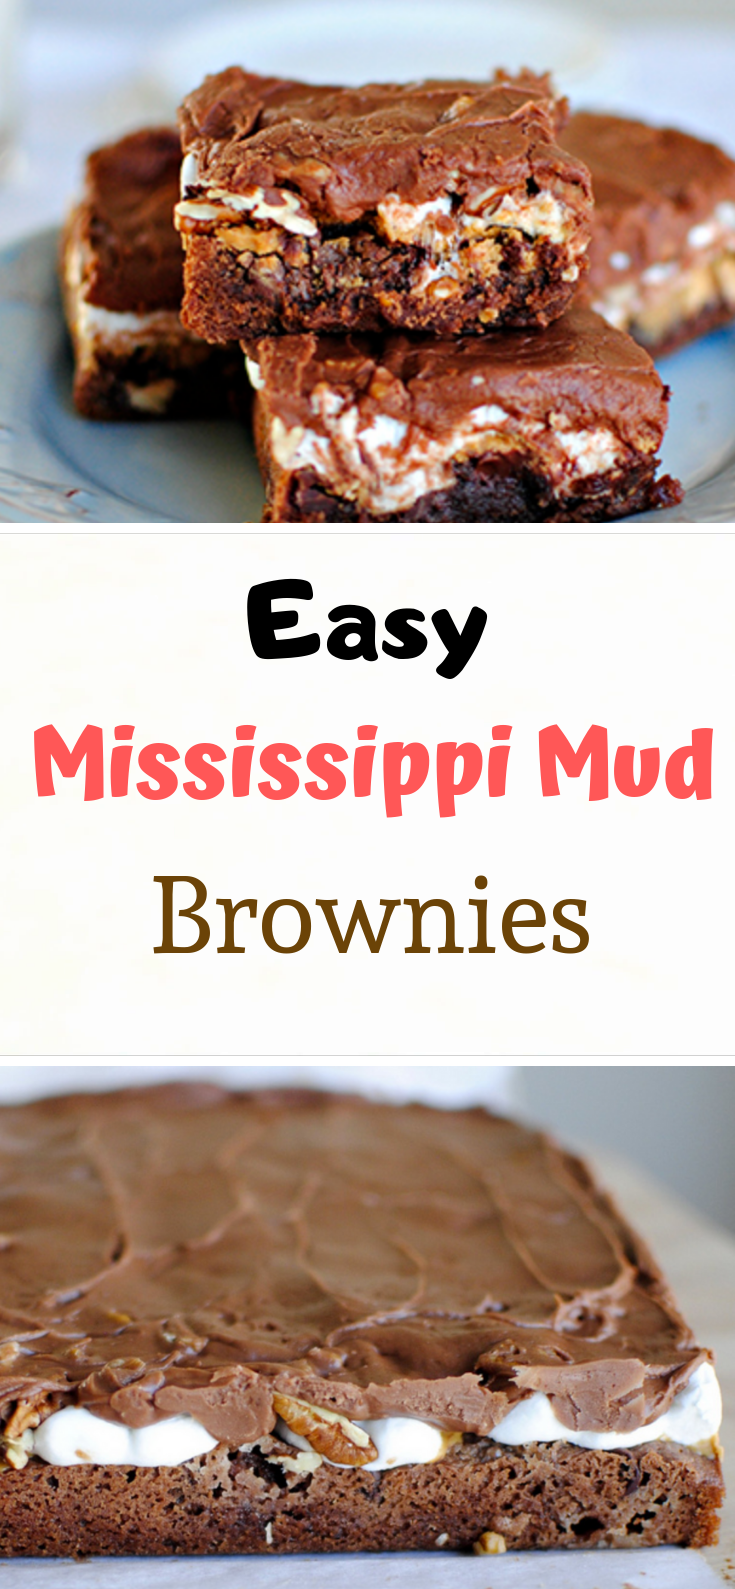 Easy Mississippi Mud Brownies Recipe | Reni's Kitchen